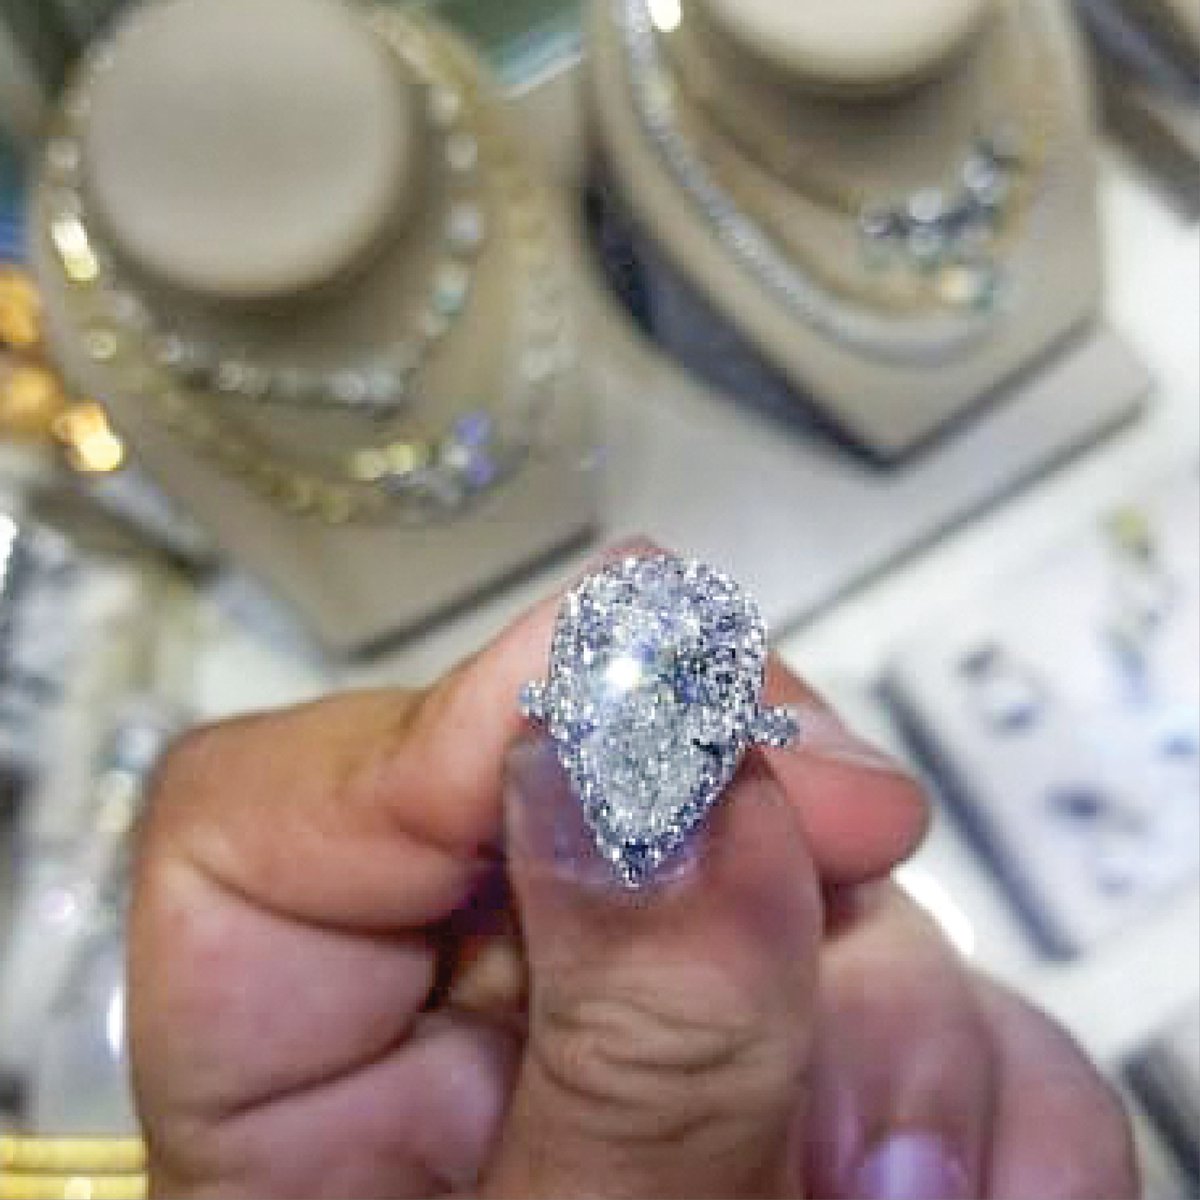 Check out the sparkling selection at #GlendaleJewelryMart - the ultimate hidden gem in downtown Glendale! 💎 #dtglendale #myglendale #chooseglendale